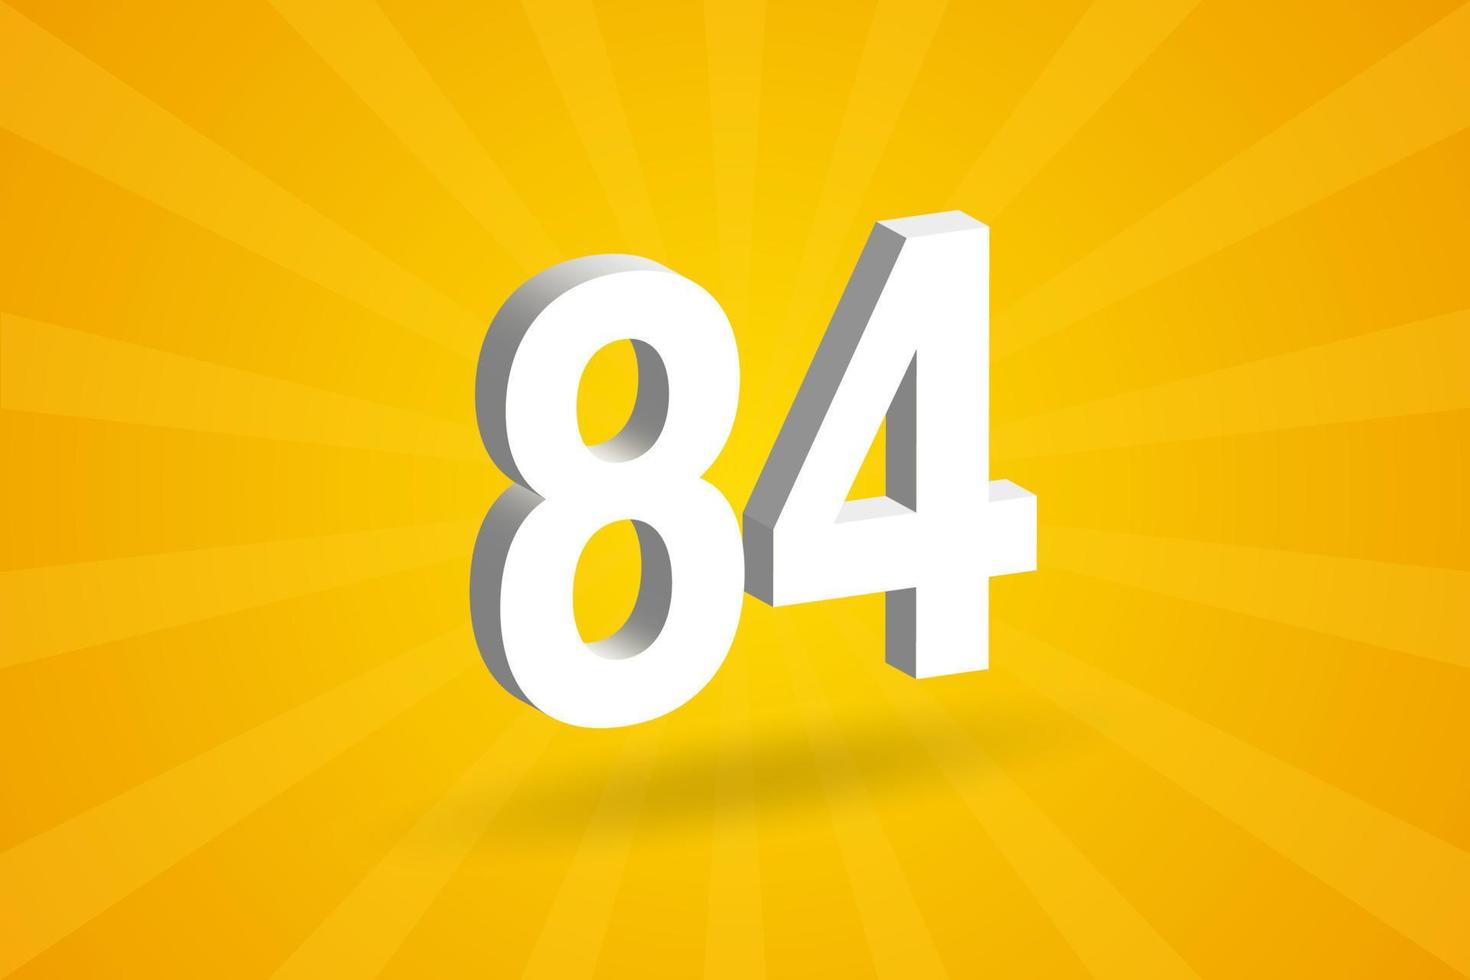 3D 84 number font alphabet. White 3D Number 84 with yellow background vector